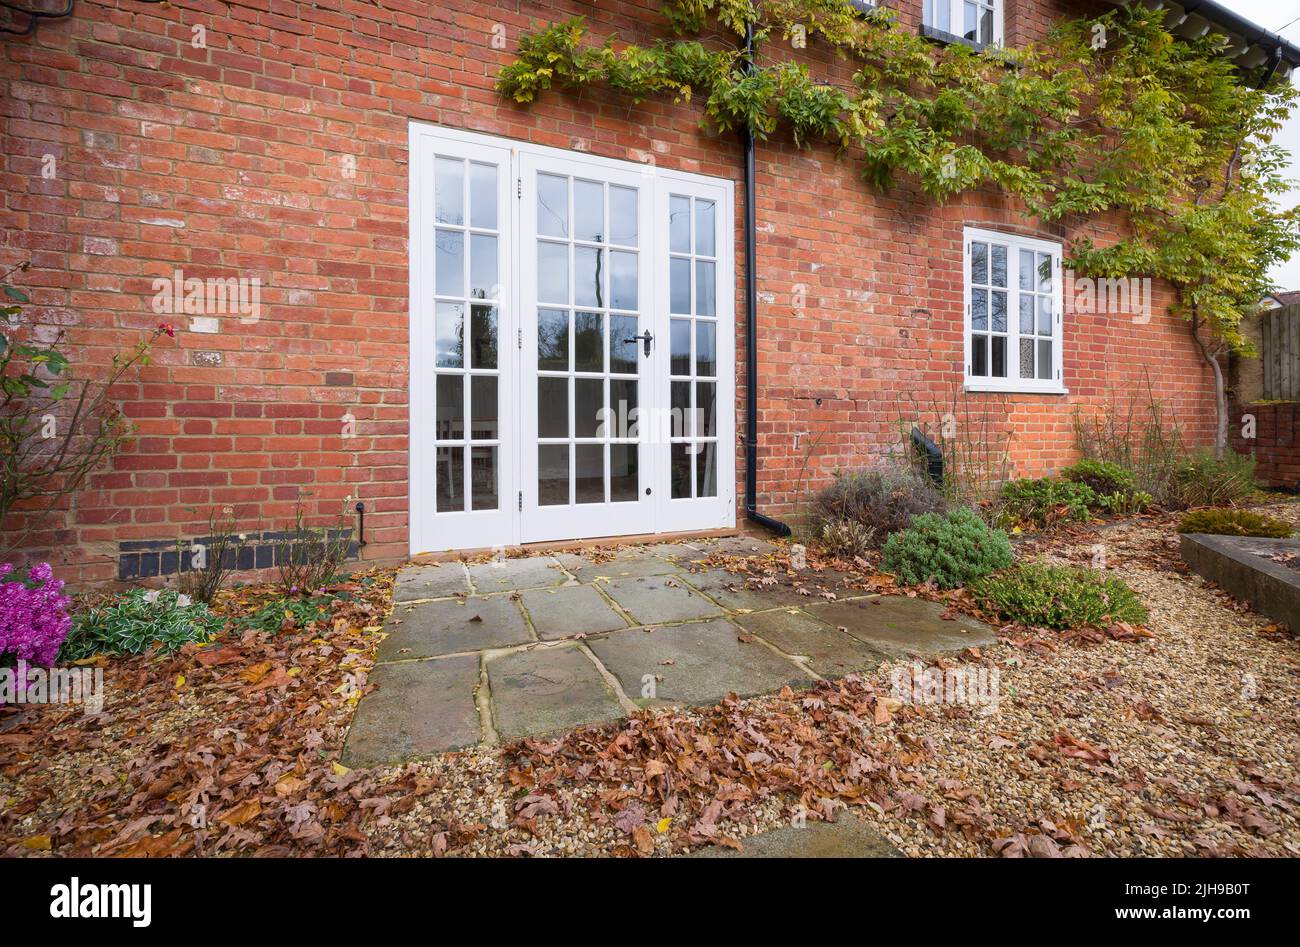 Wooden French doors and a York stone patio in a UK landscaped garden with autumn leaves Stock Photo